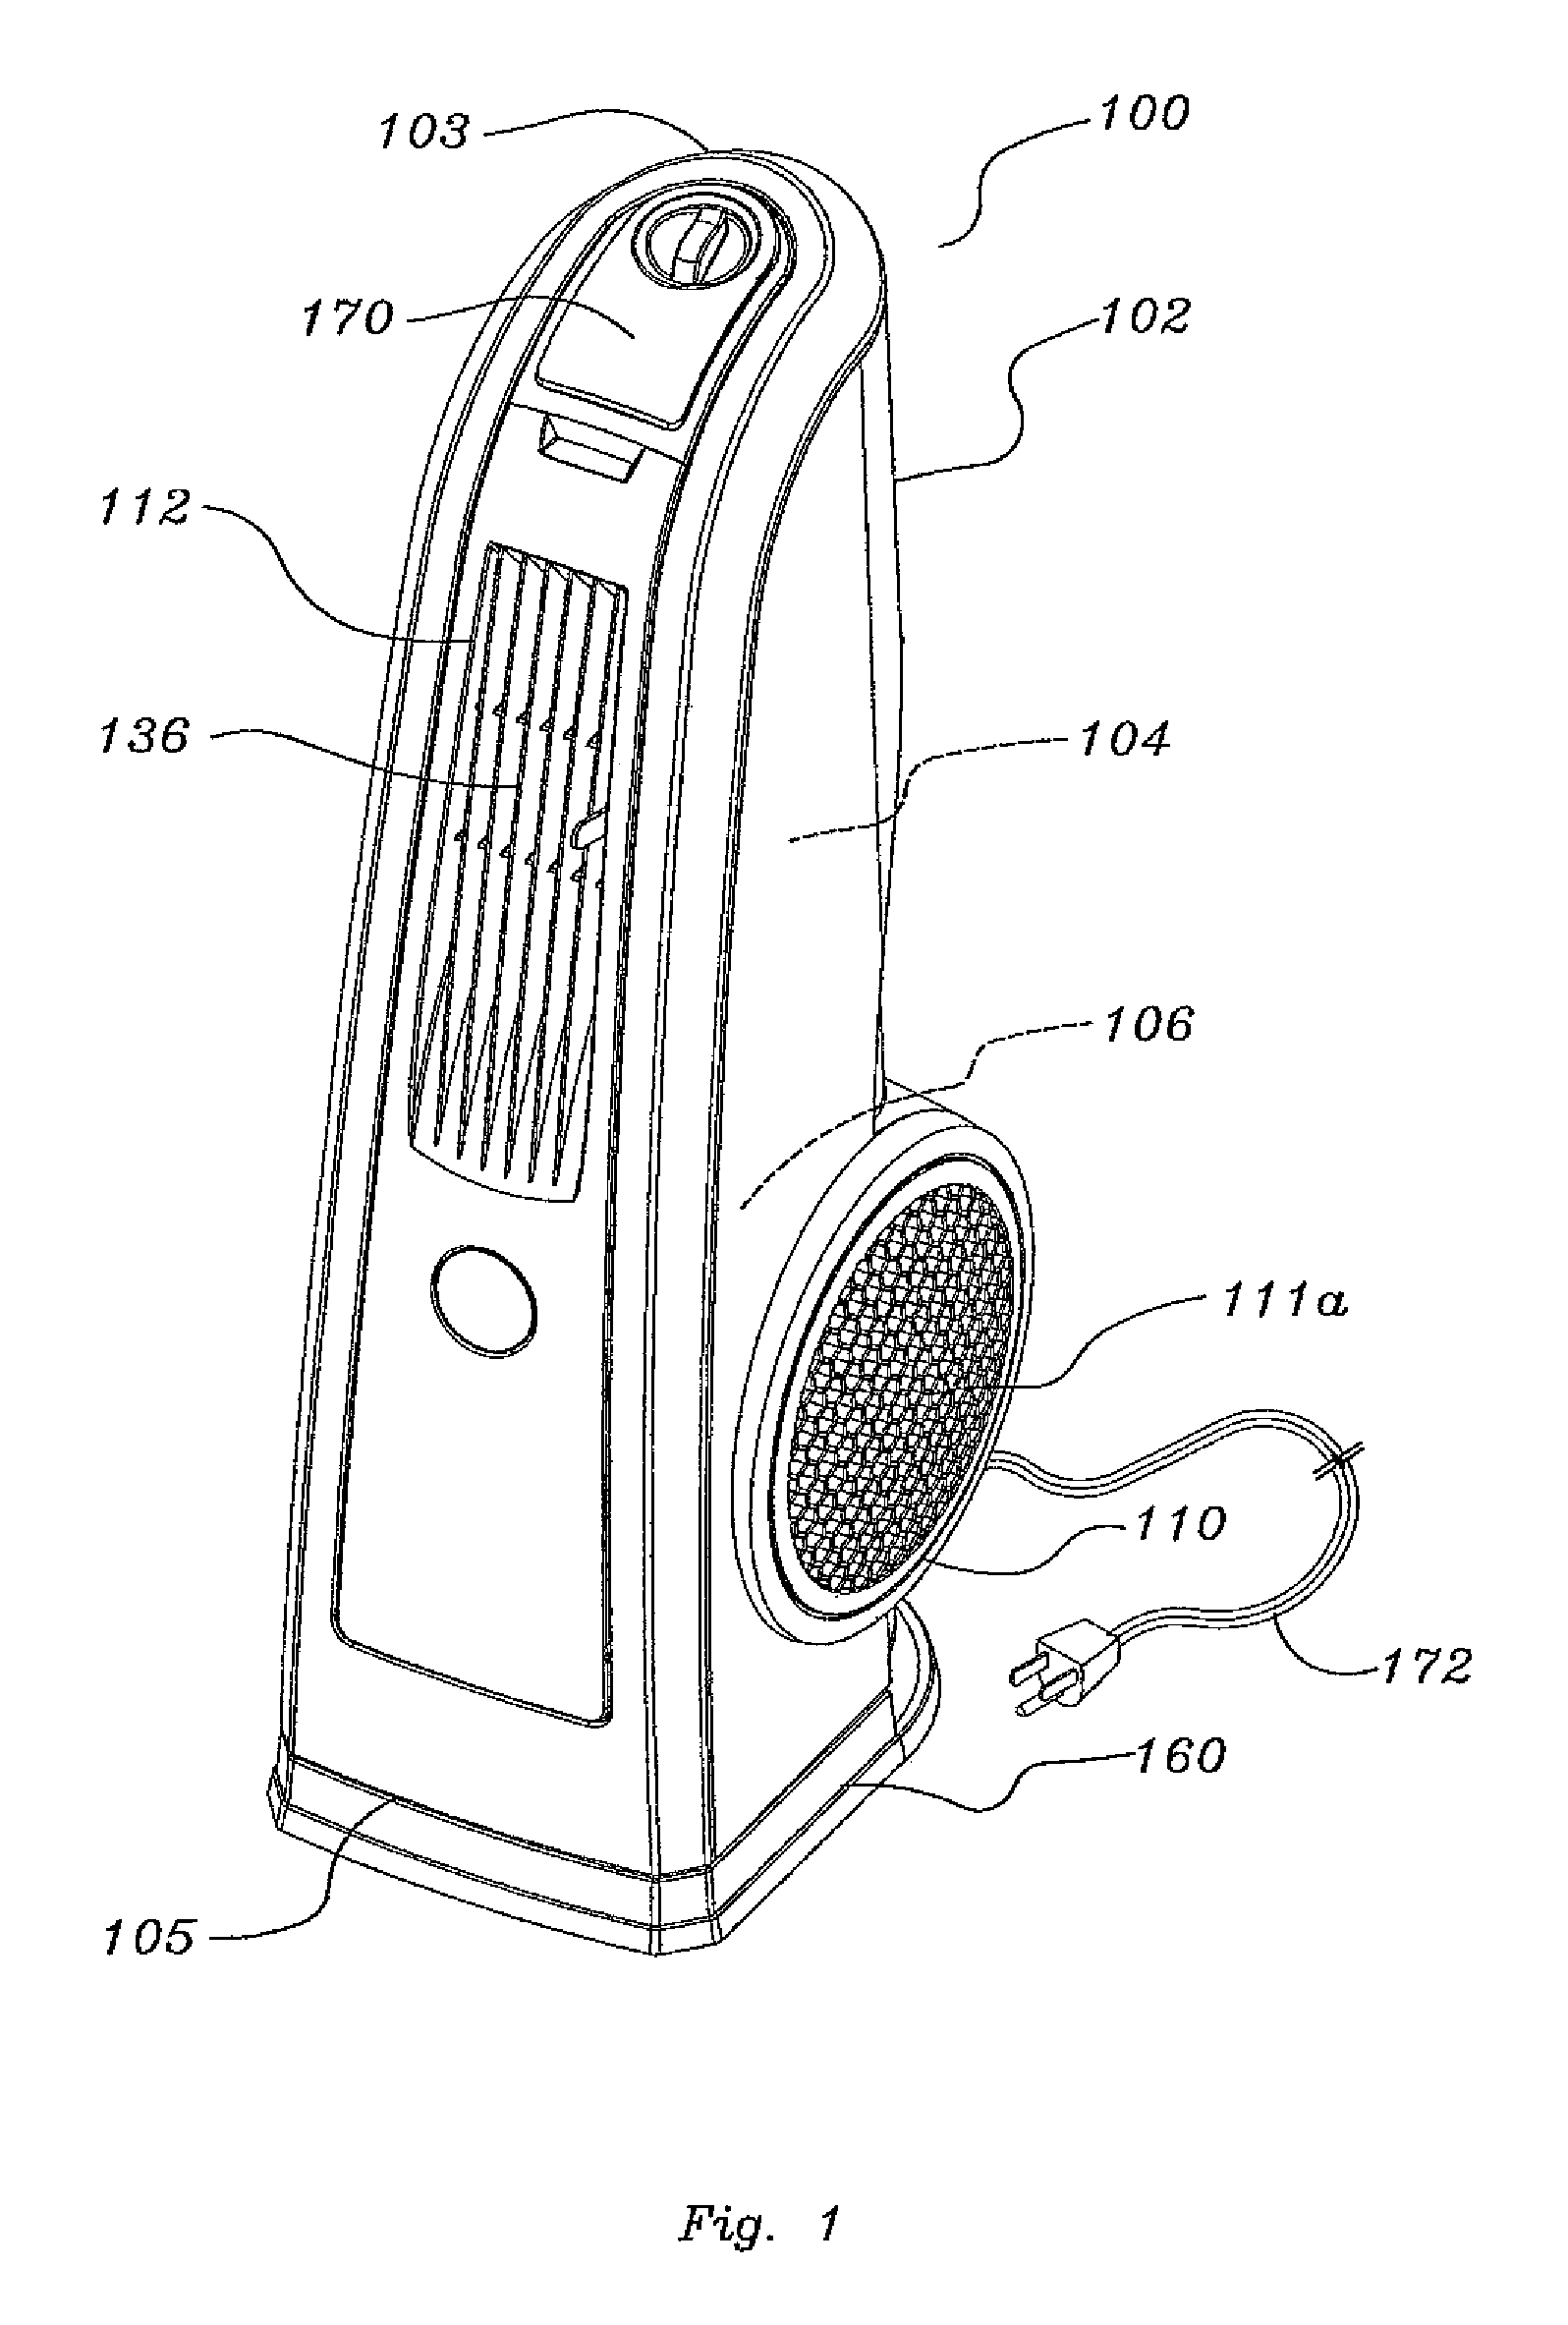 Portable air moving device